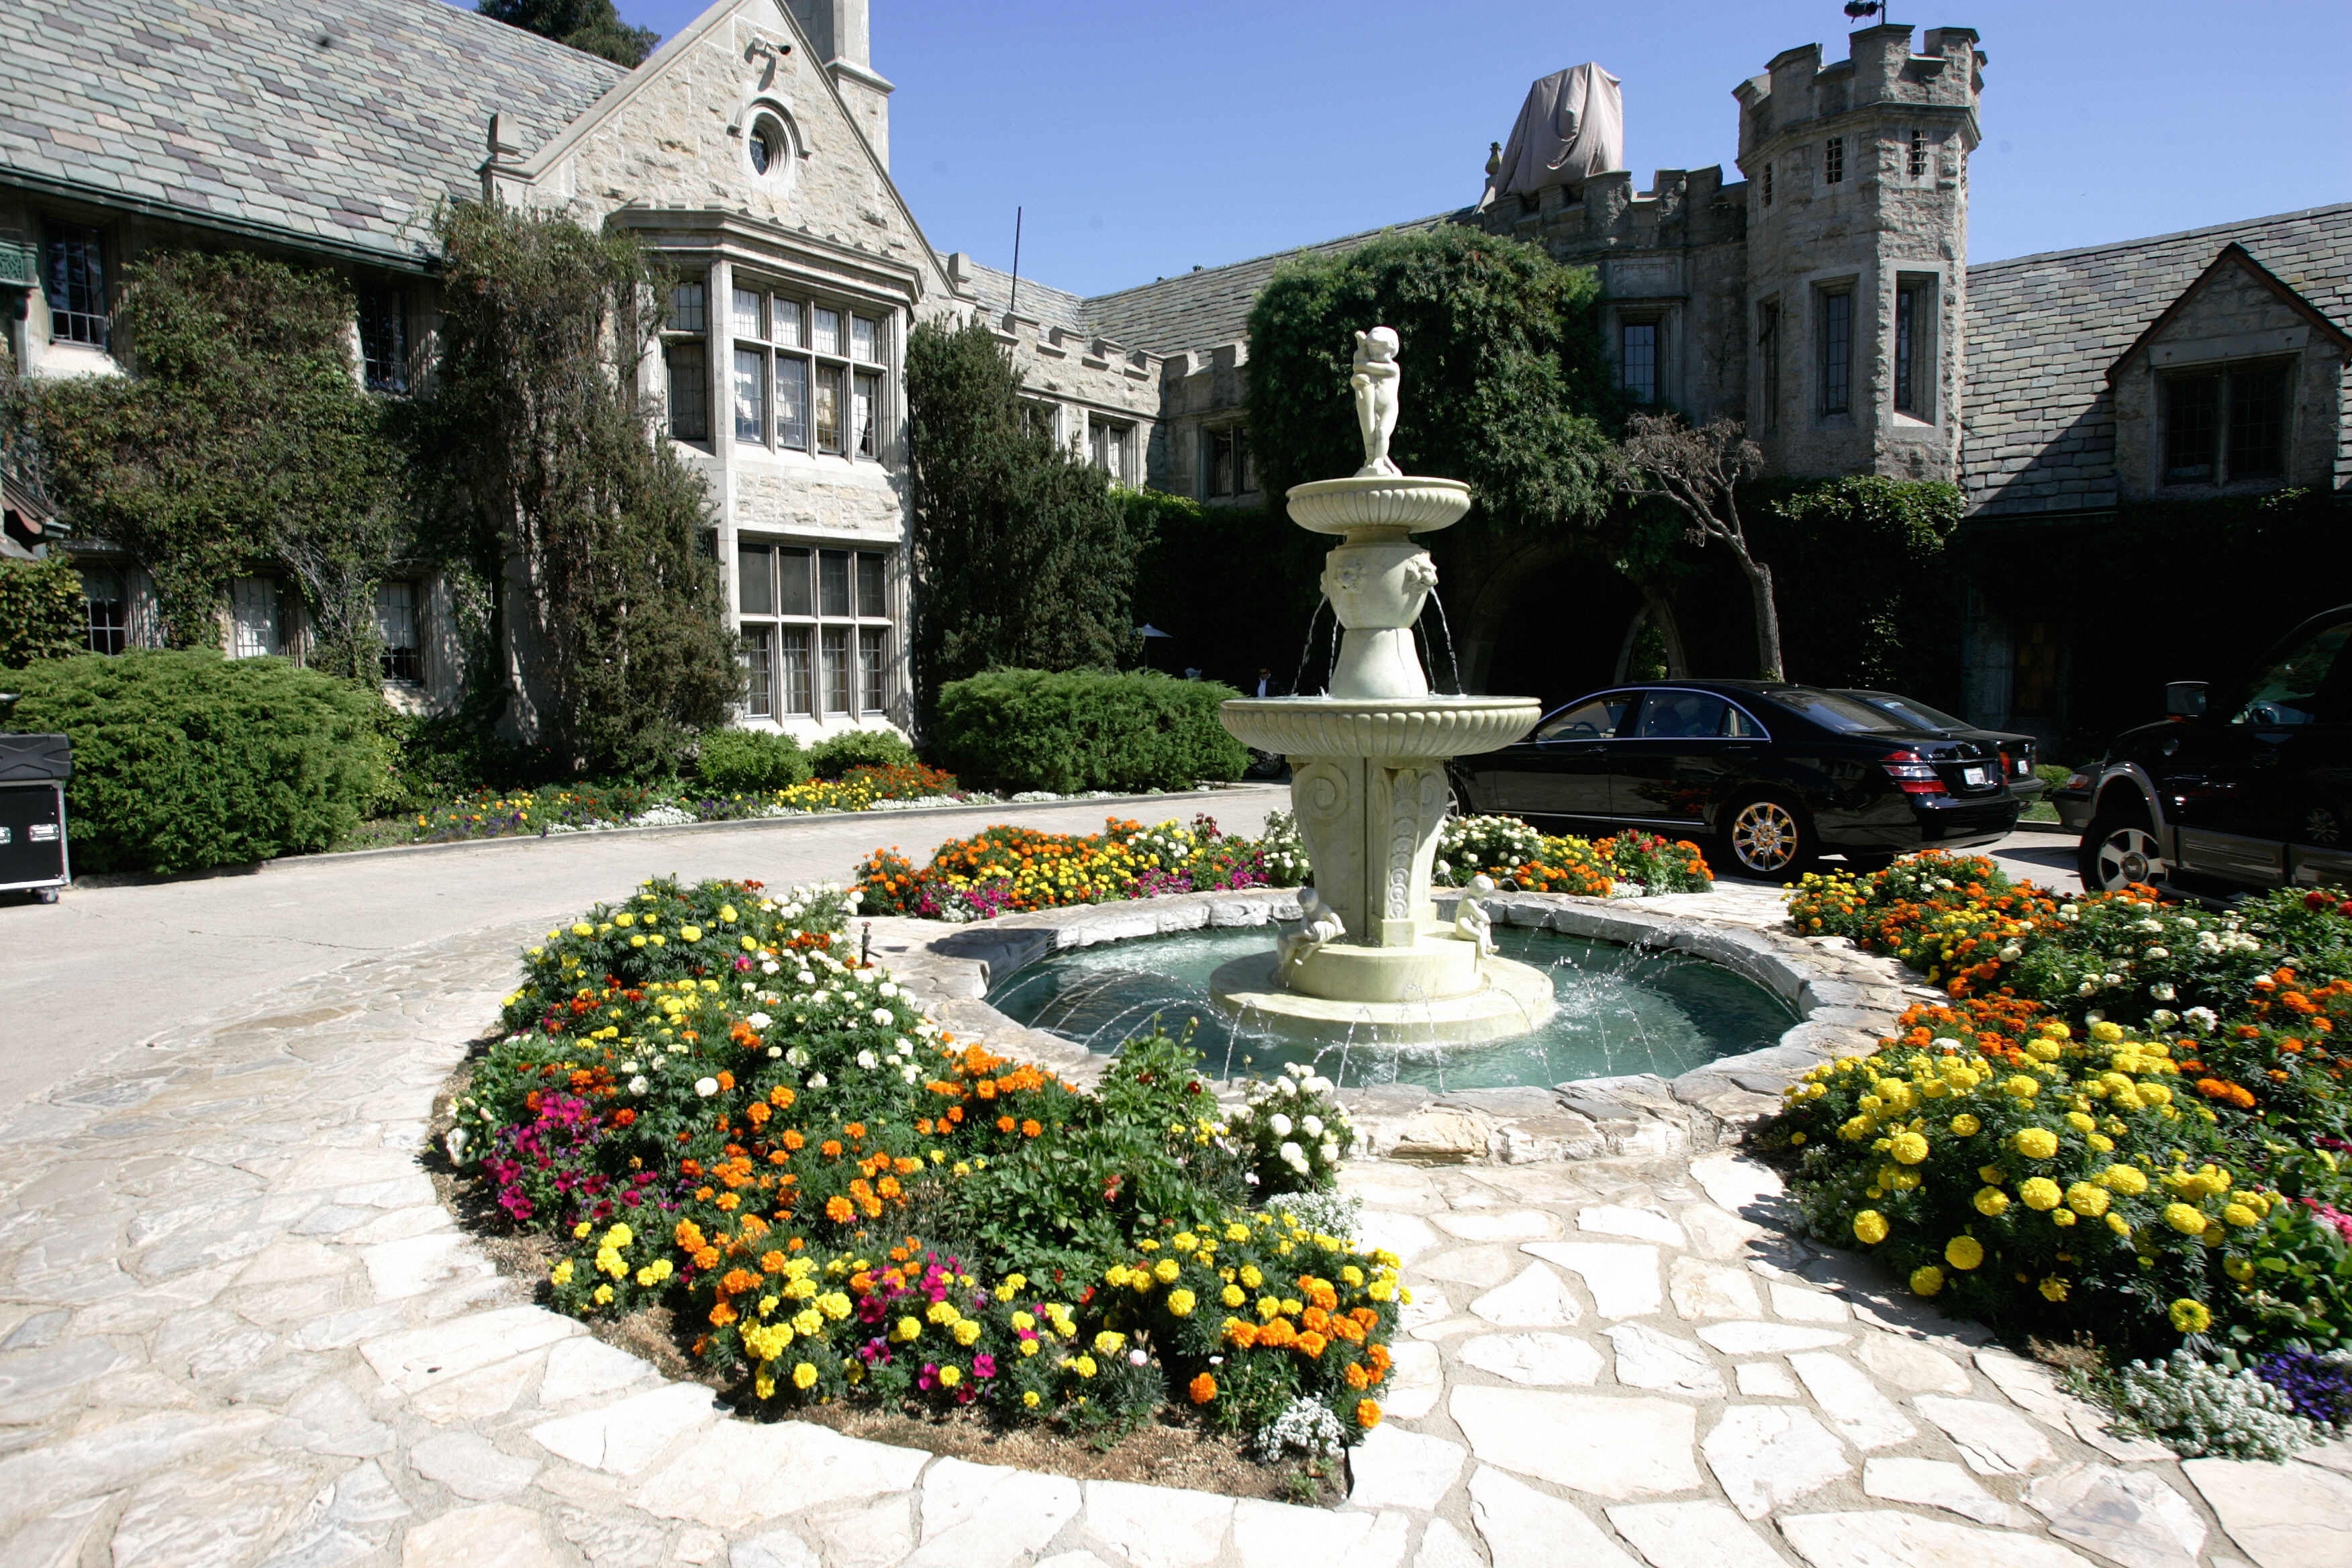 The entrance of the Playboy mansion in 2006